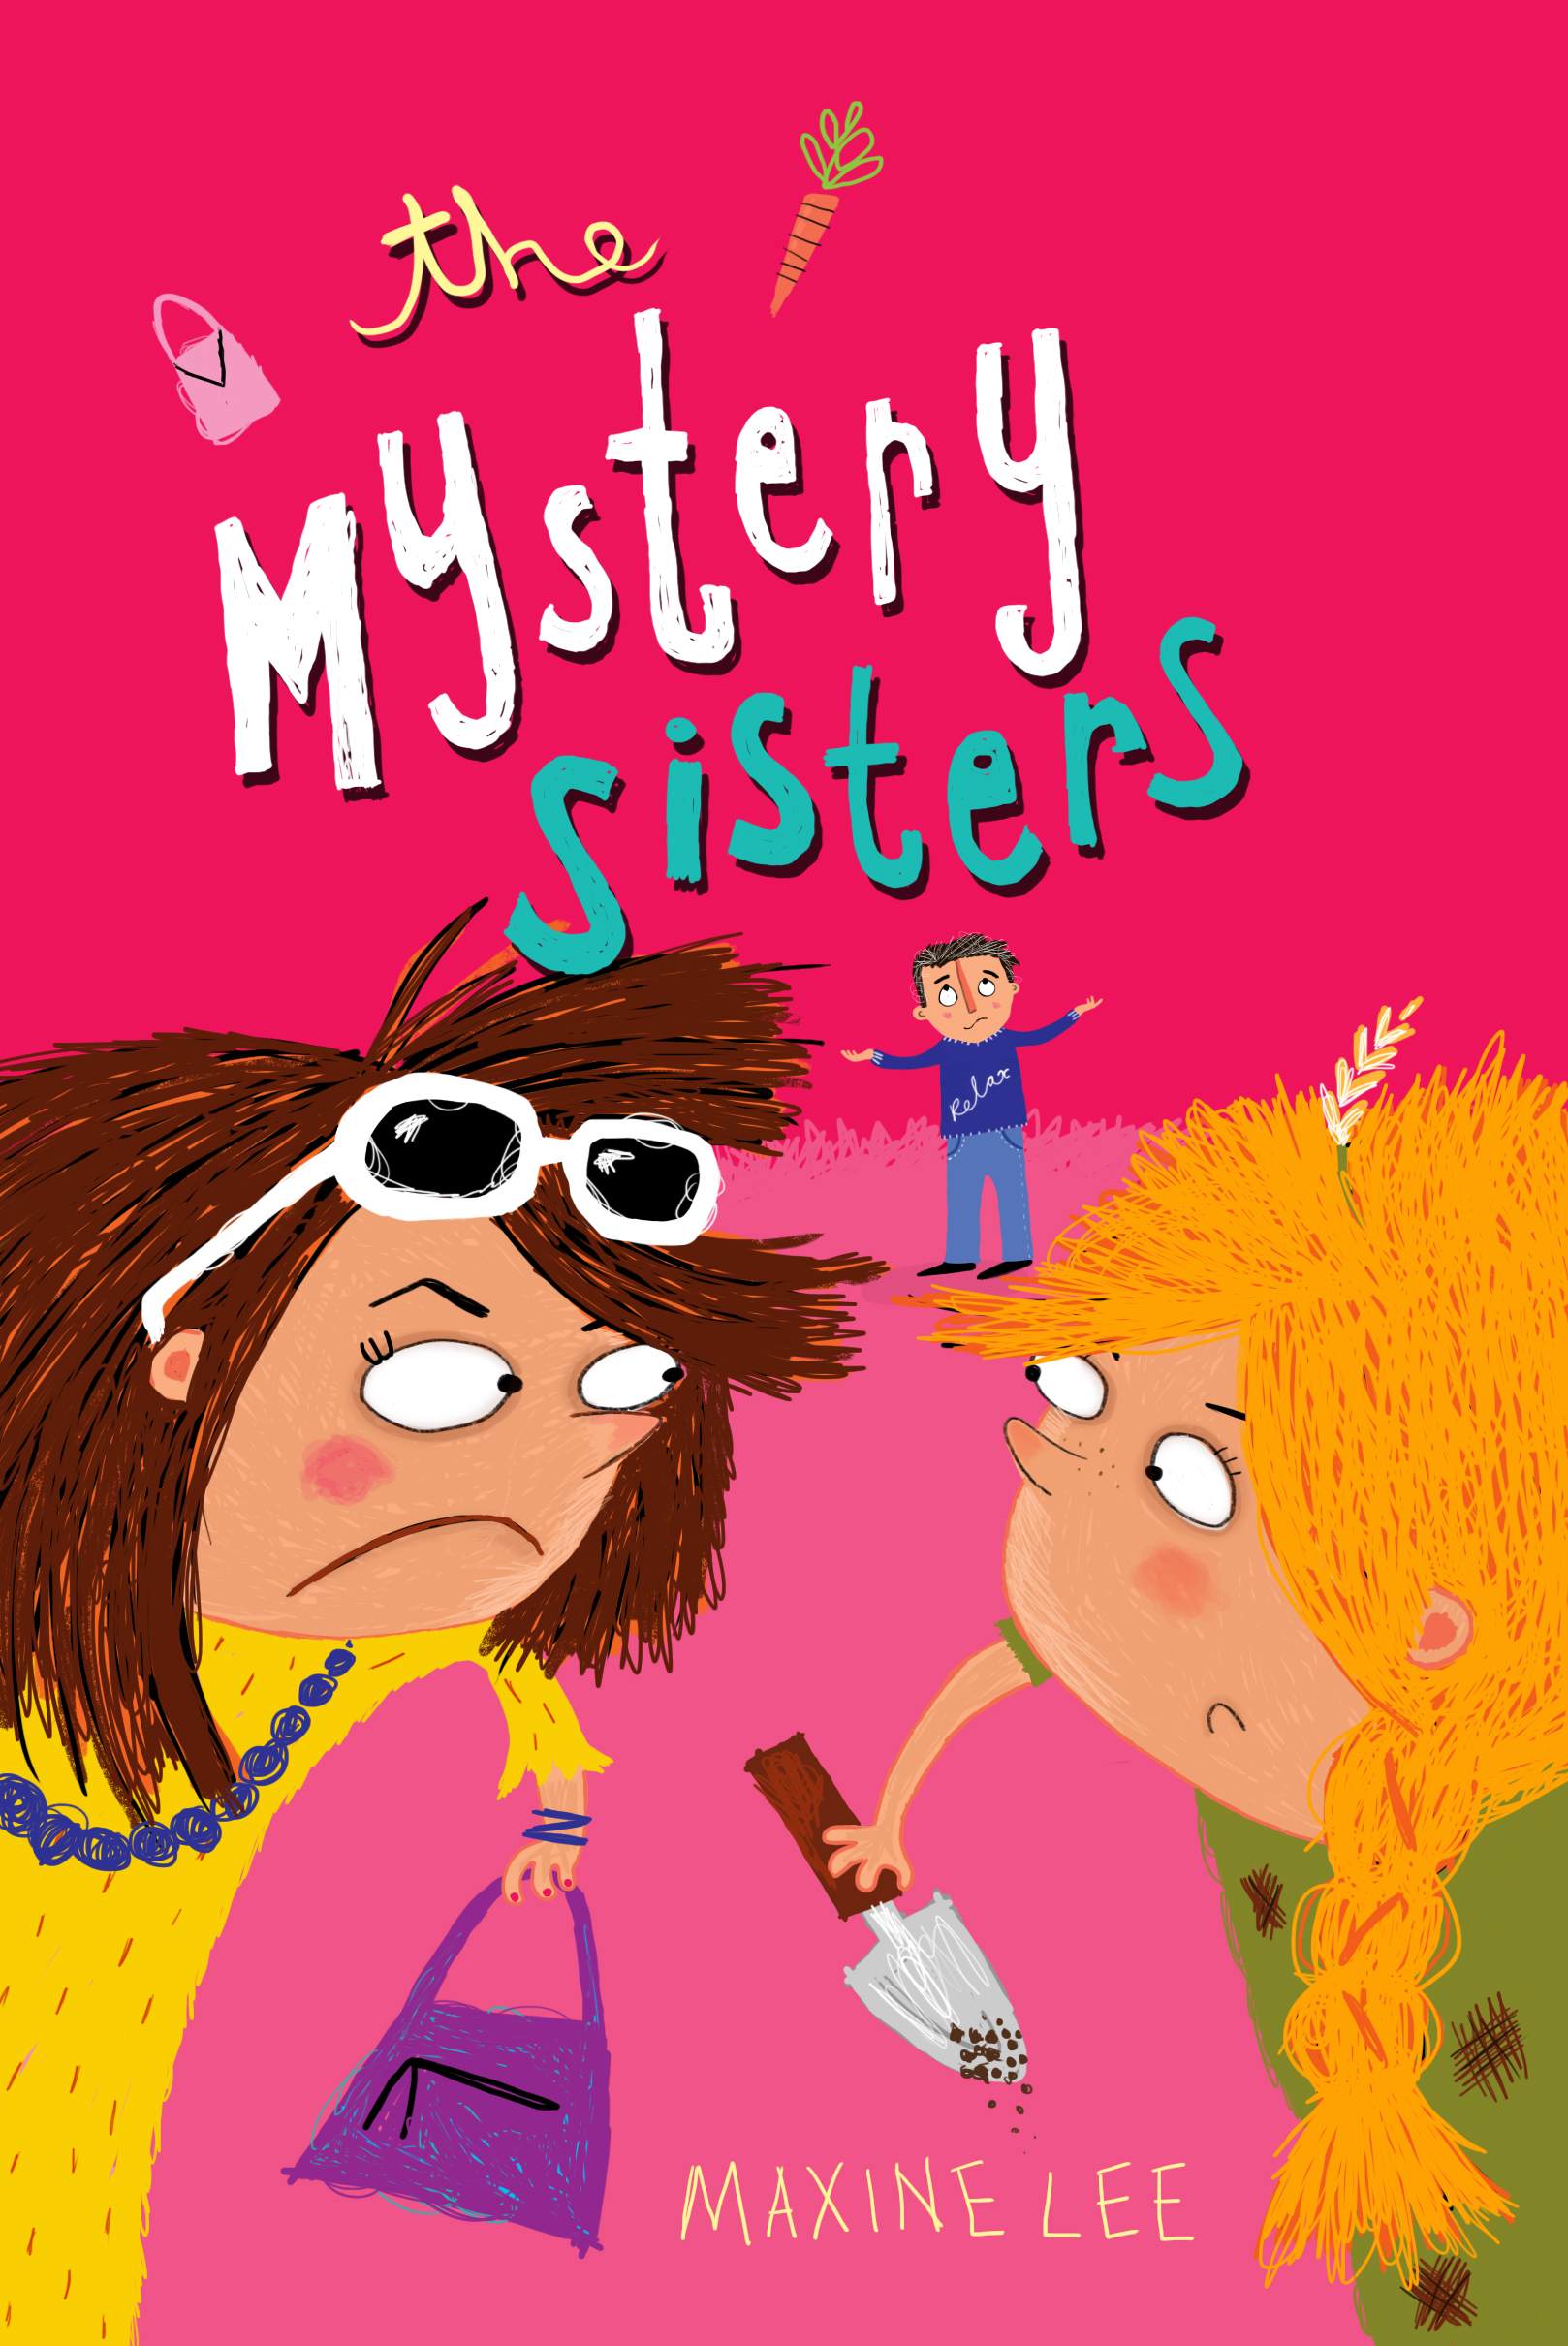 Book Cover Concept - Mystery Sisters